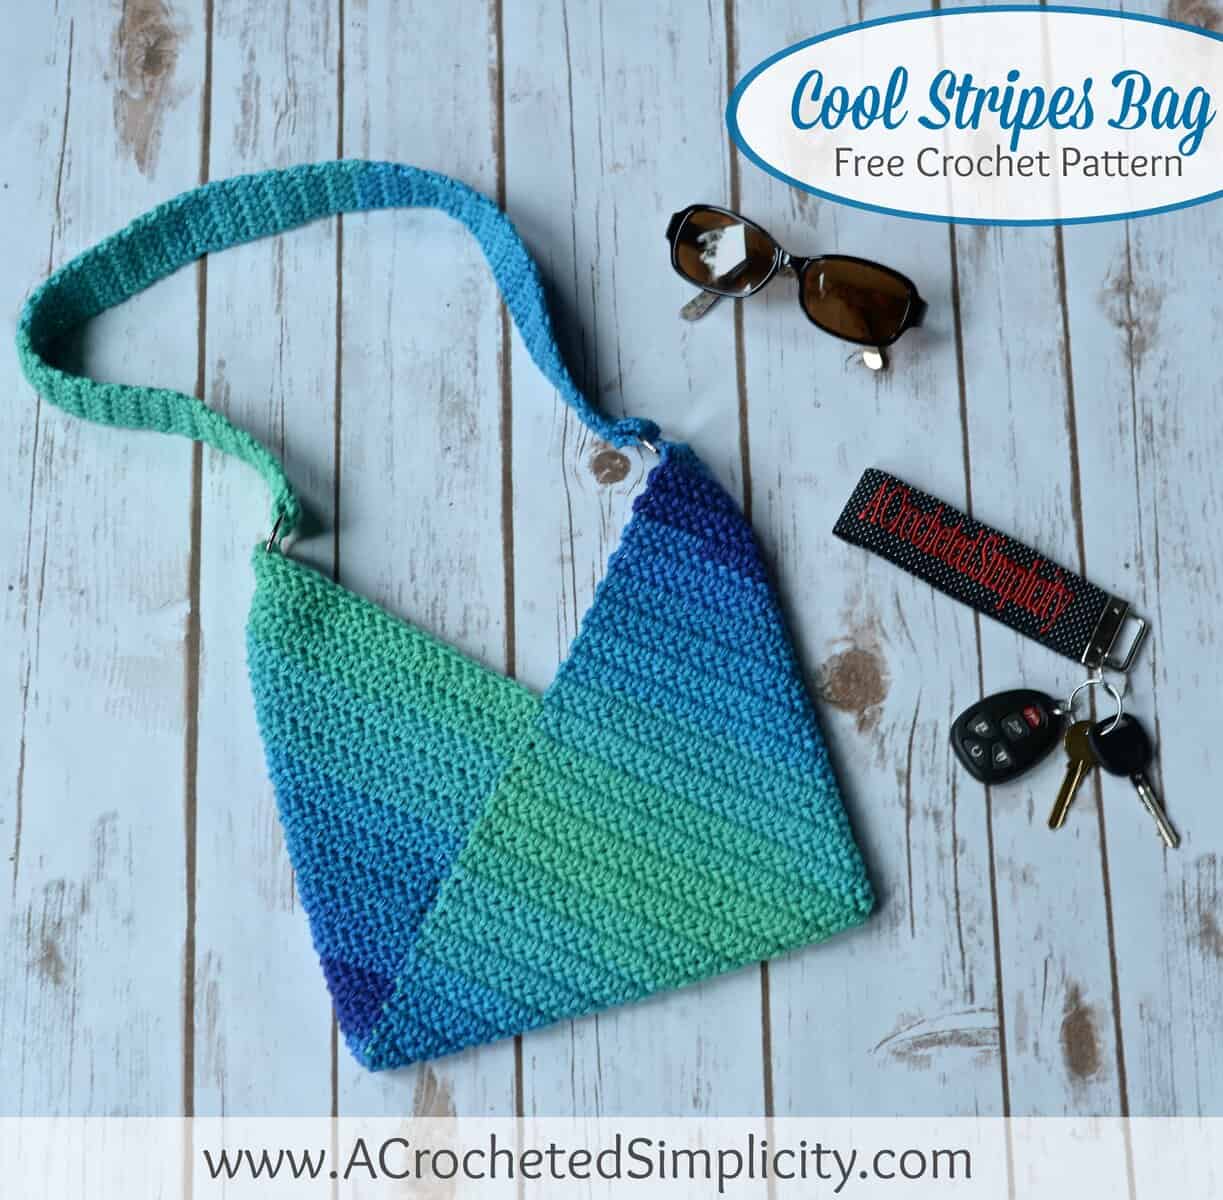 10 Free Crochet Tote and Bag Patterns - A Roundup by Croyden Crochet